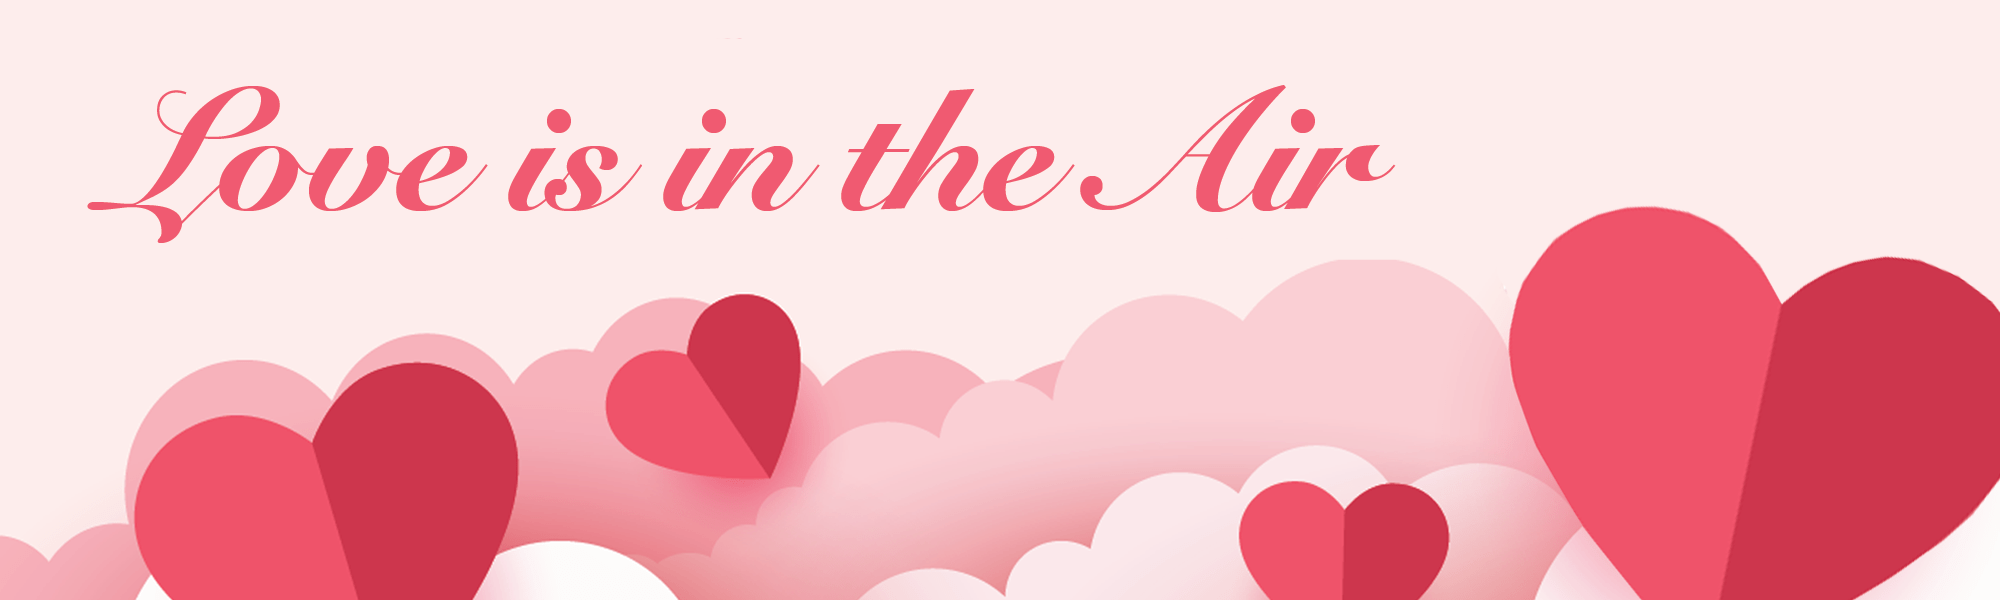 Love-is-in-the-air-web-banner